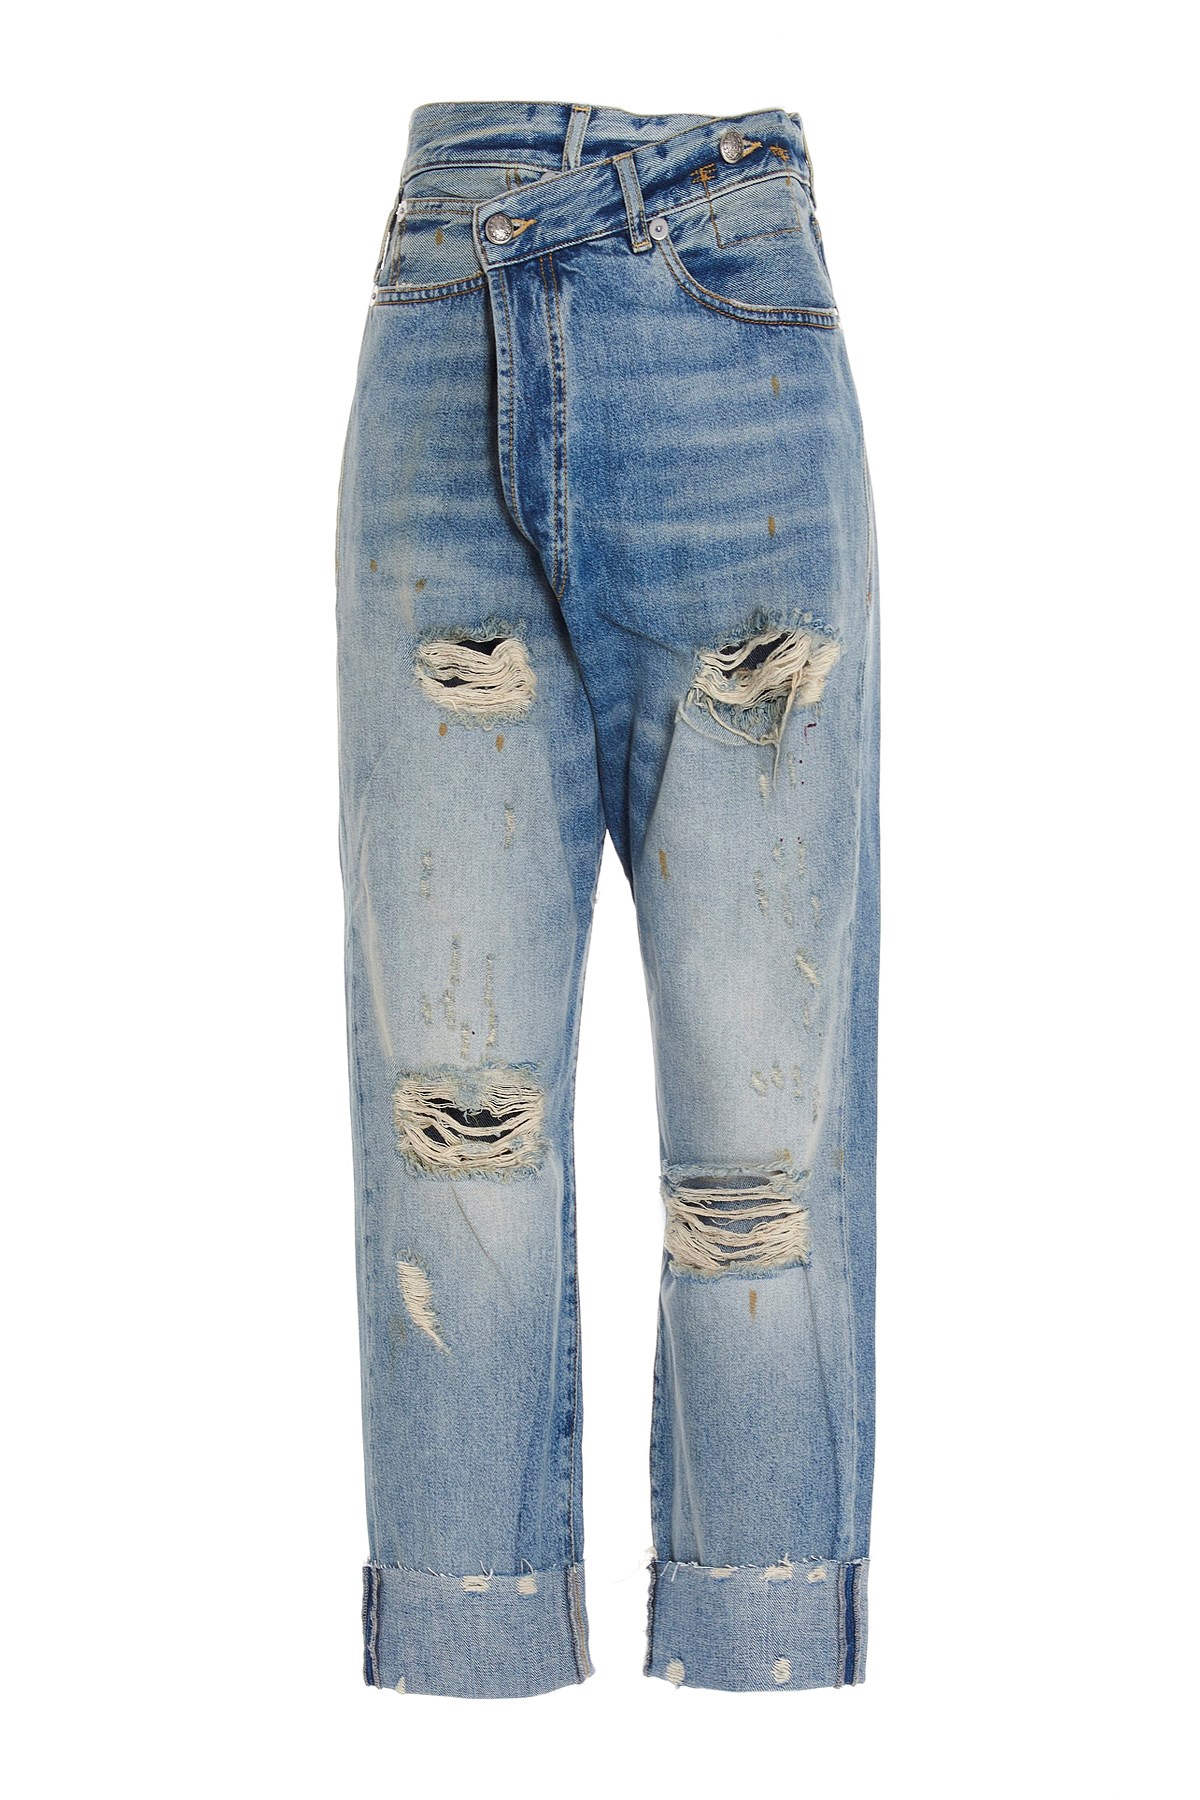 R13 'Cross Over' Jeans